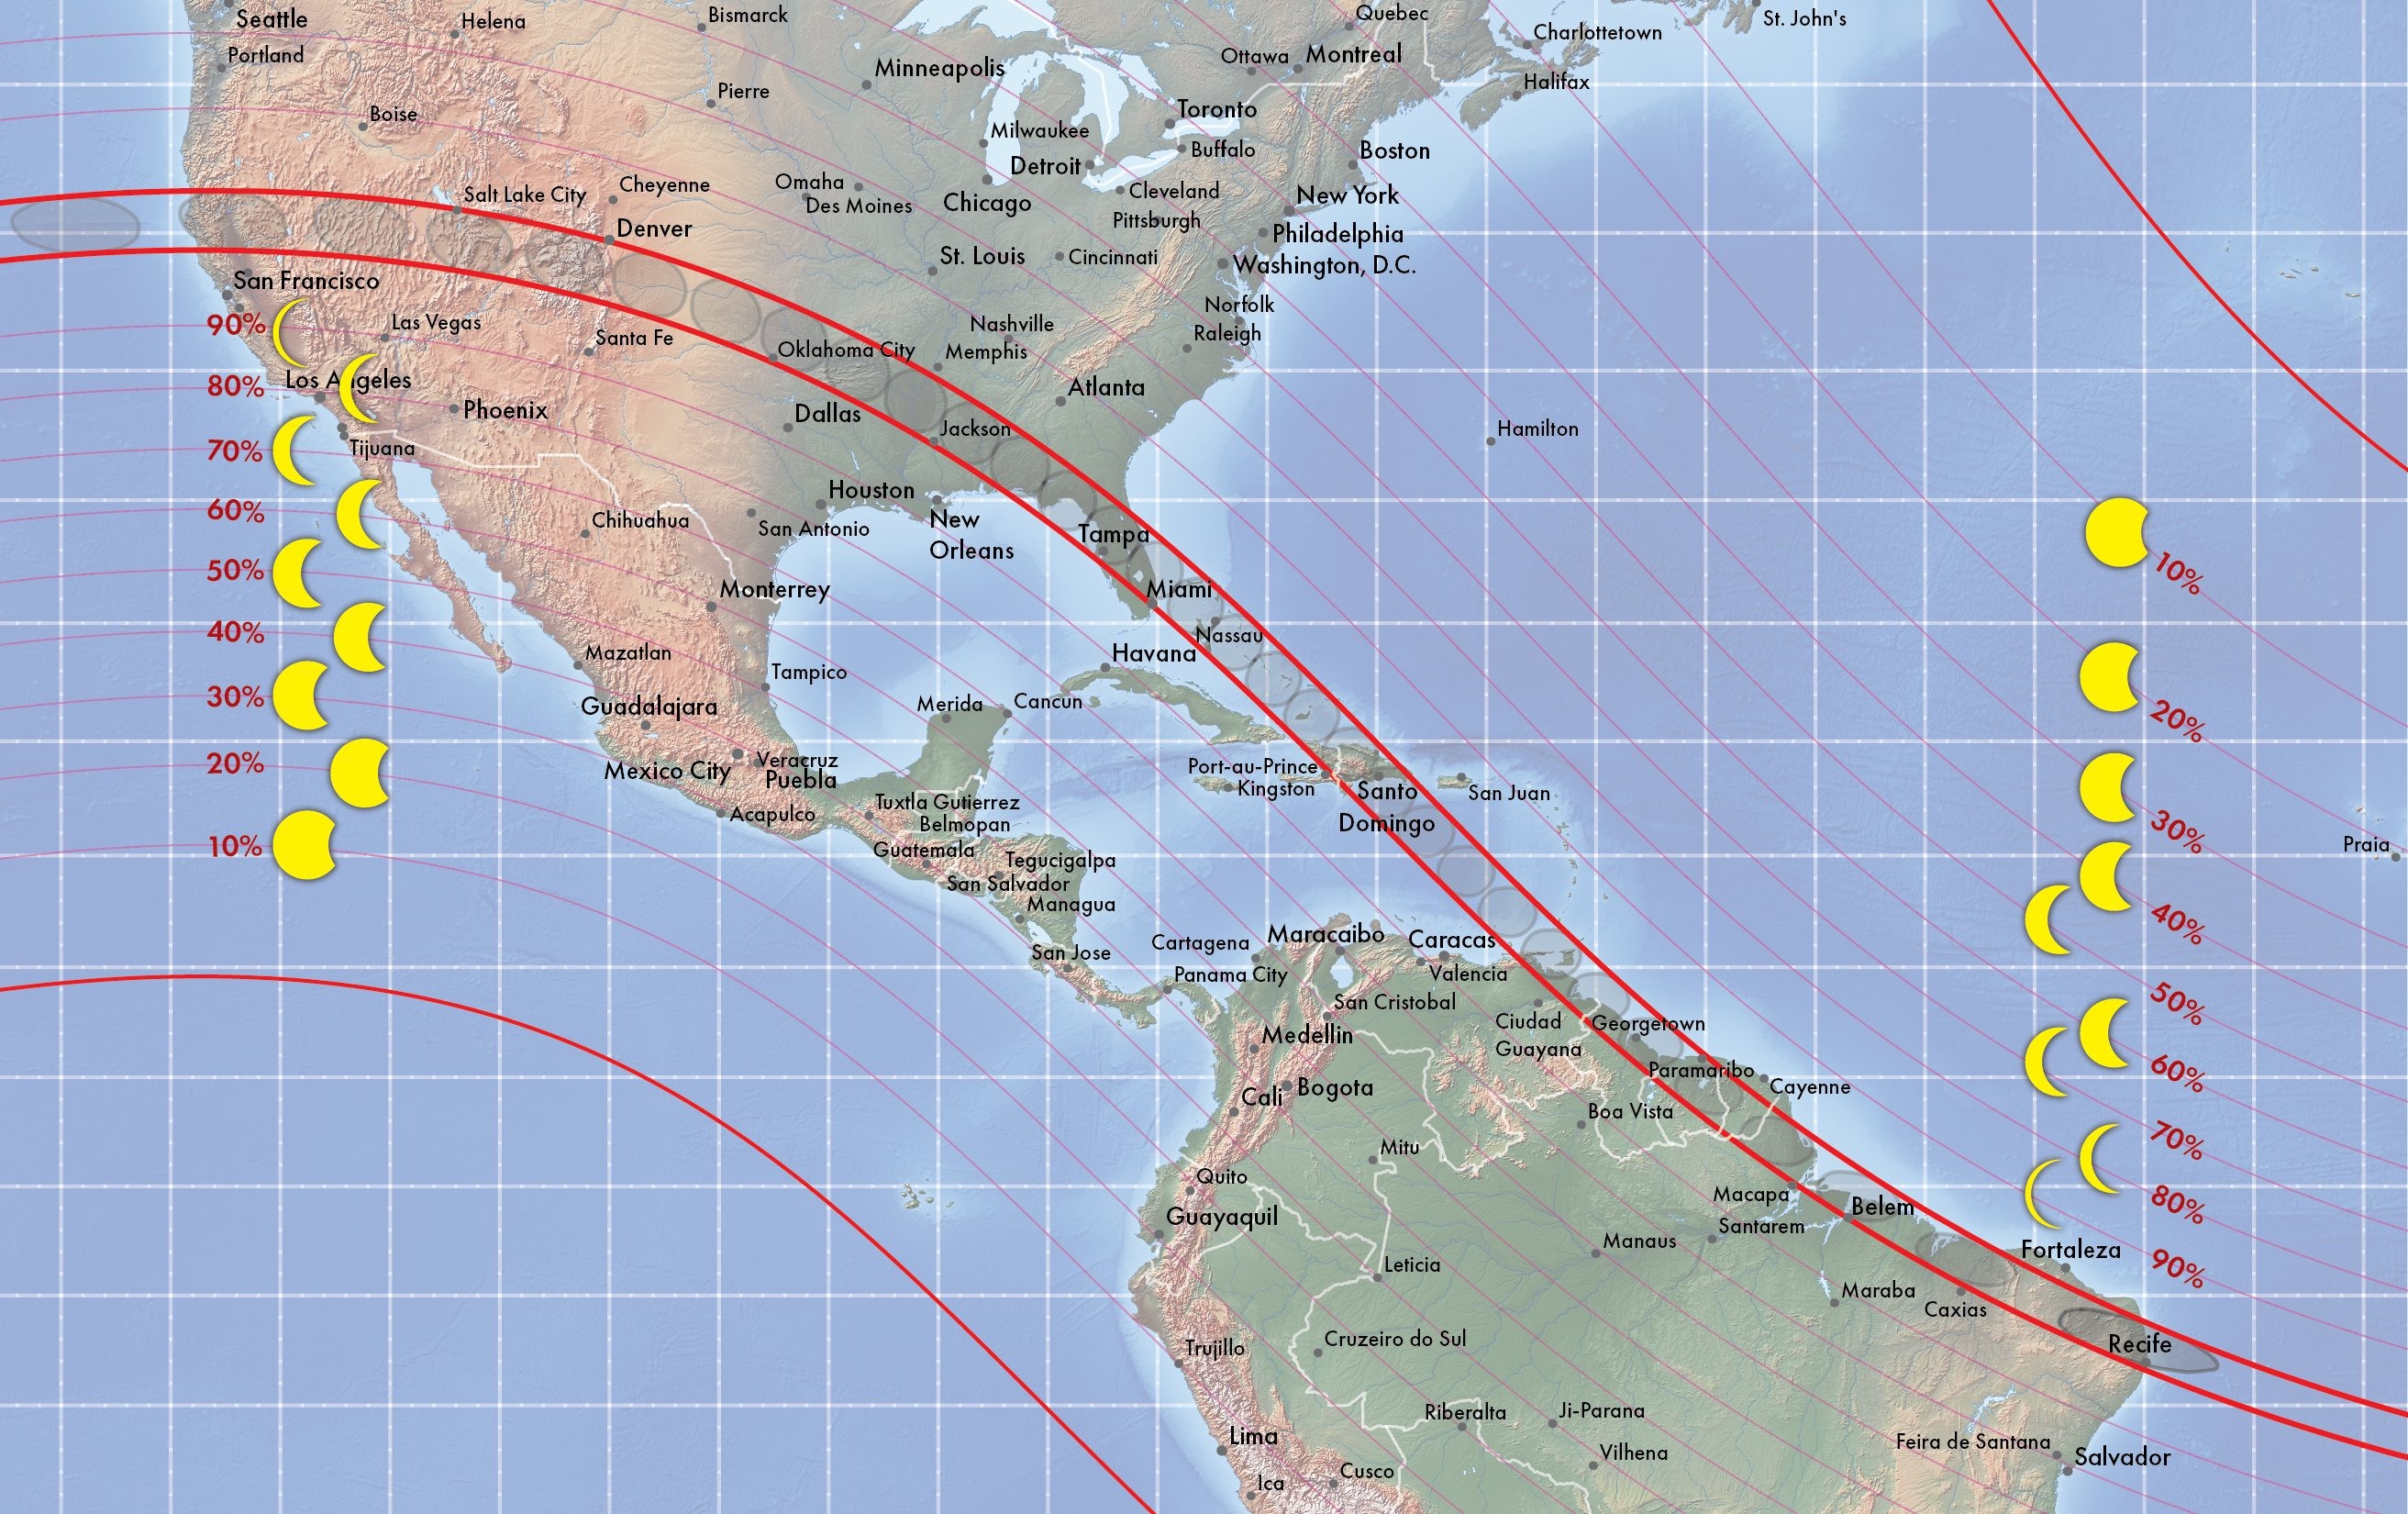 The path of totality for Great American Eclipse in 2045. Credit: Twitter/GreatAmericanEclipse.com.